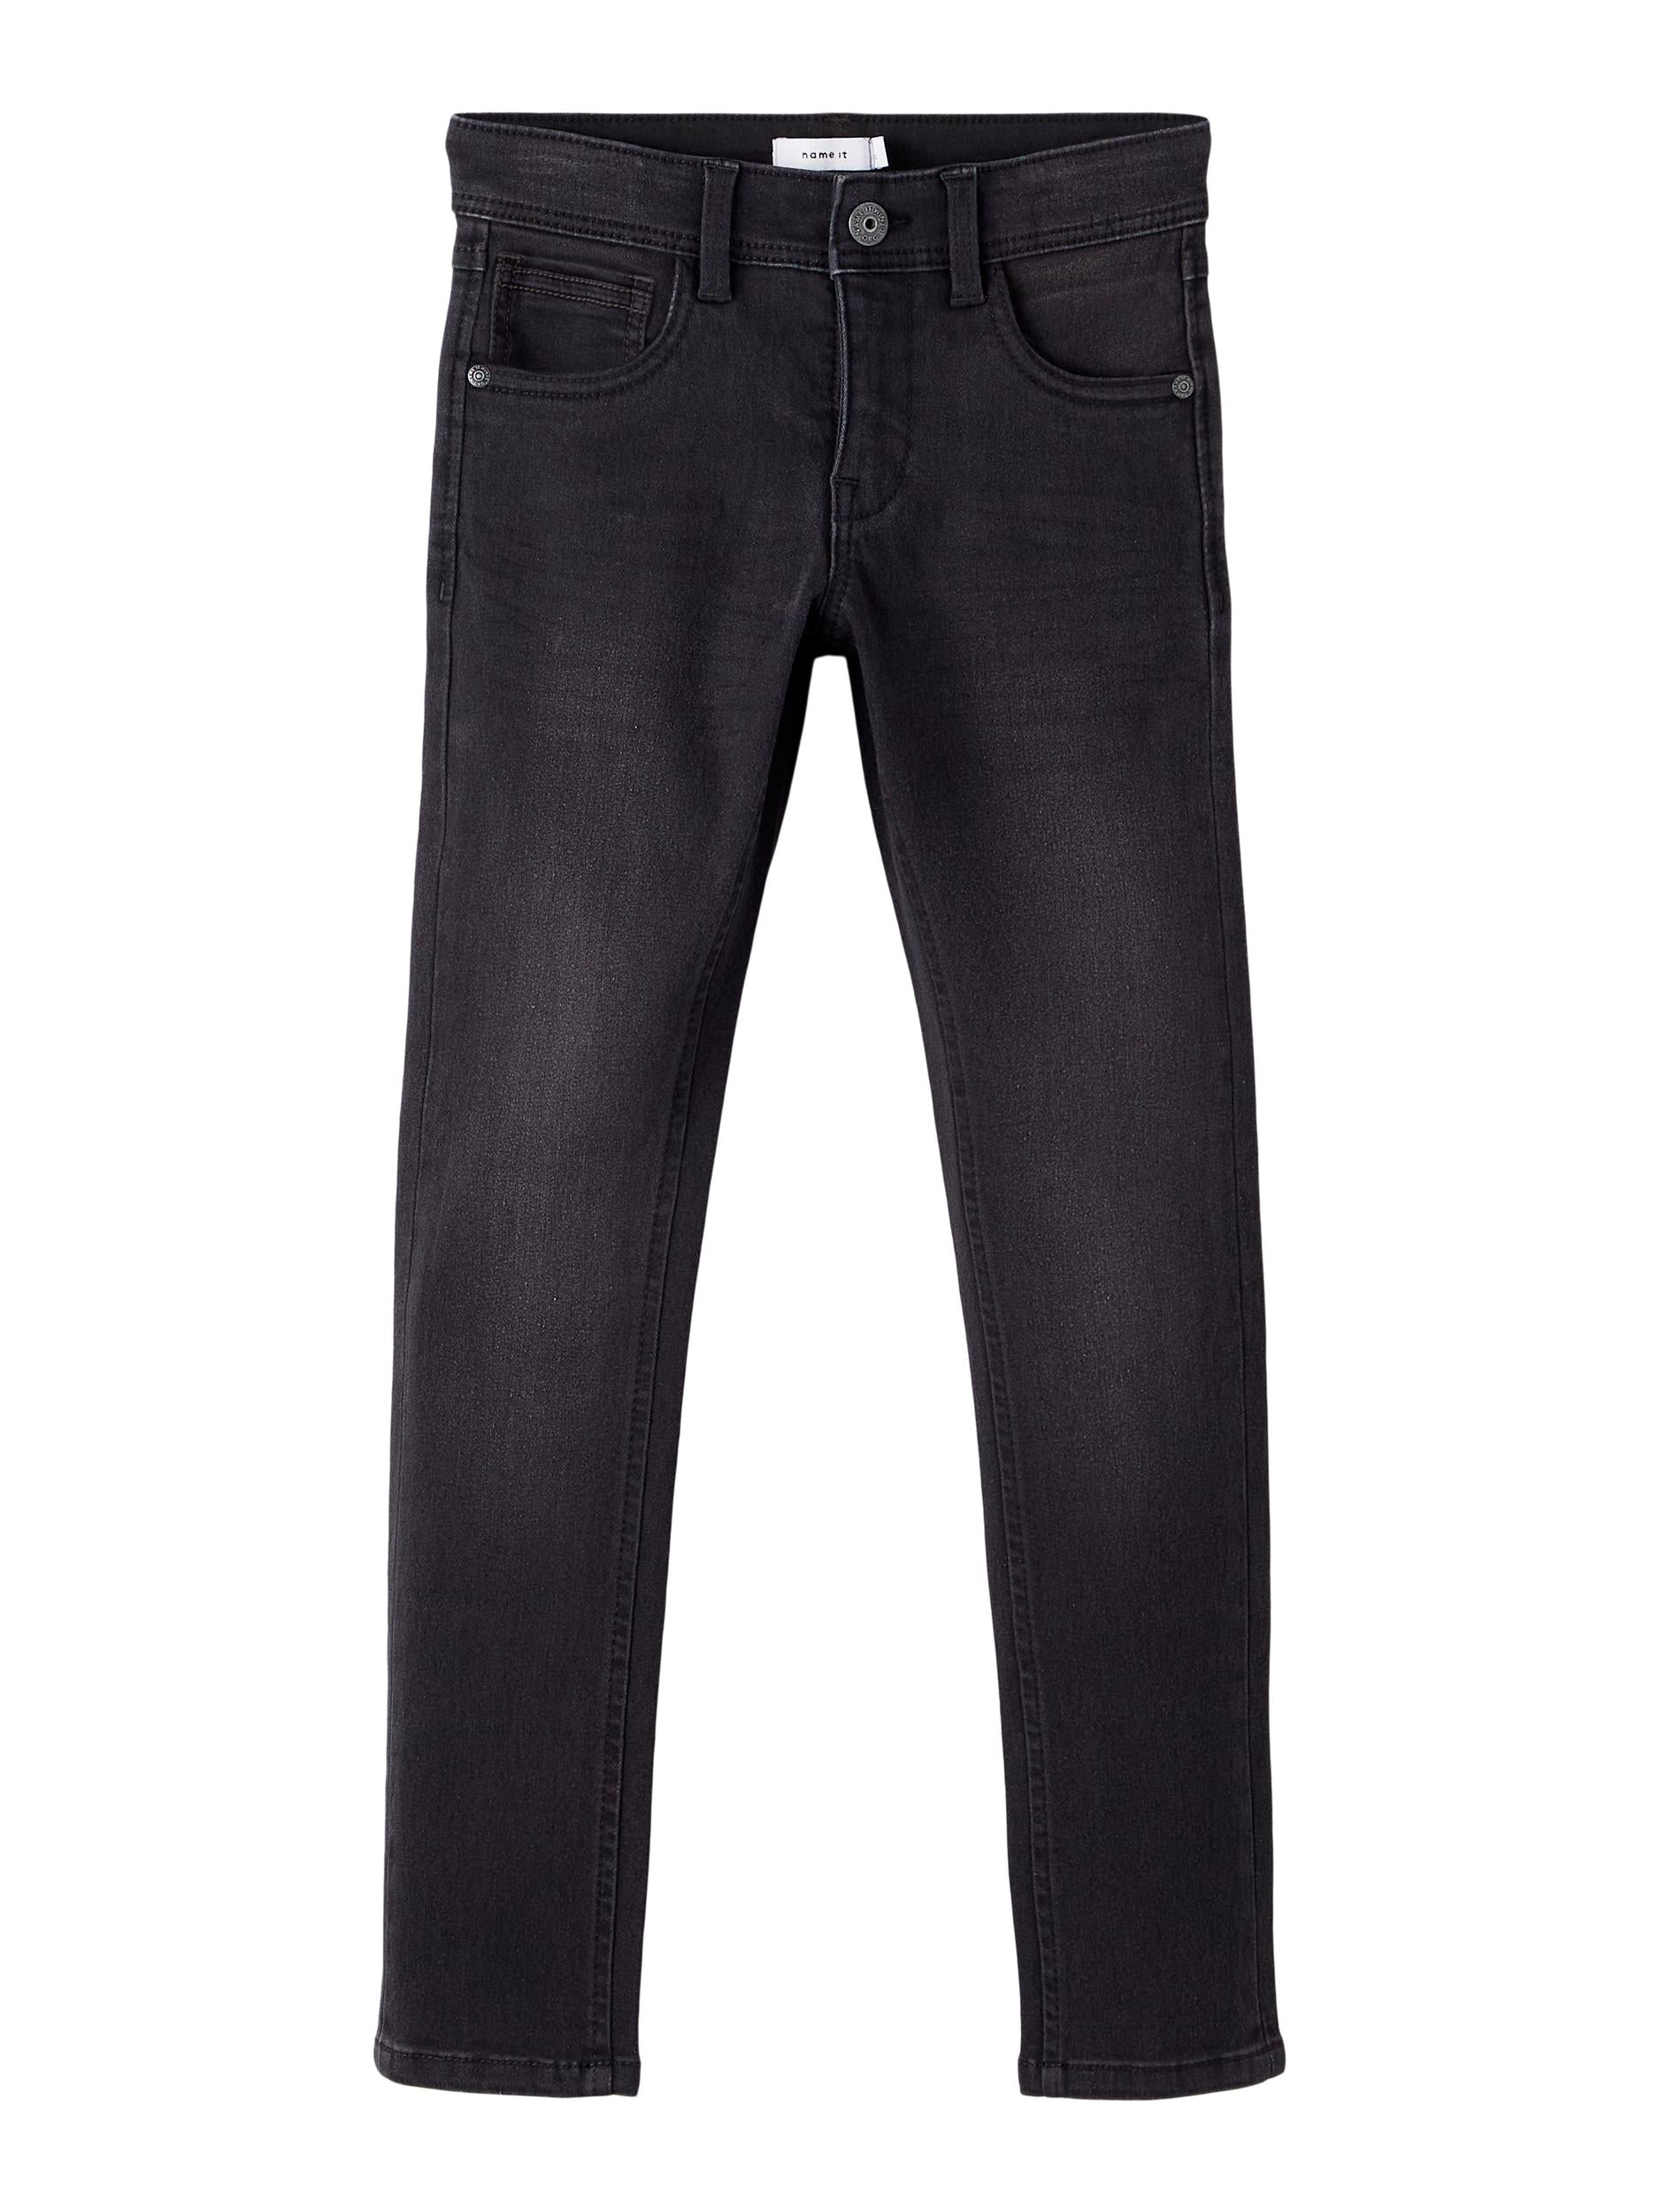 Robin Tax Pant/Black Denim-Ghost Front View